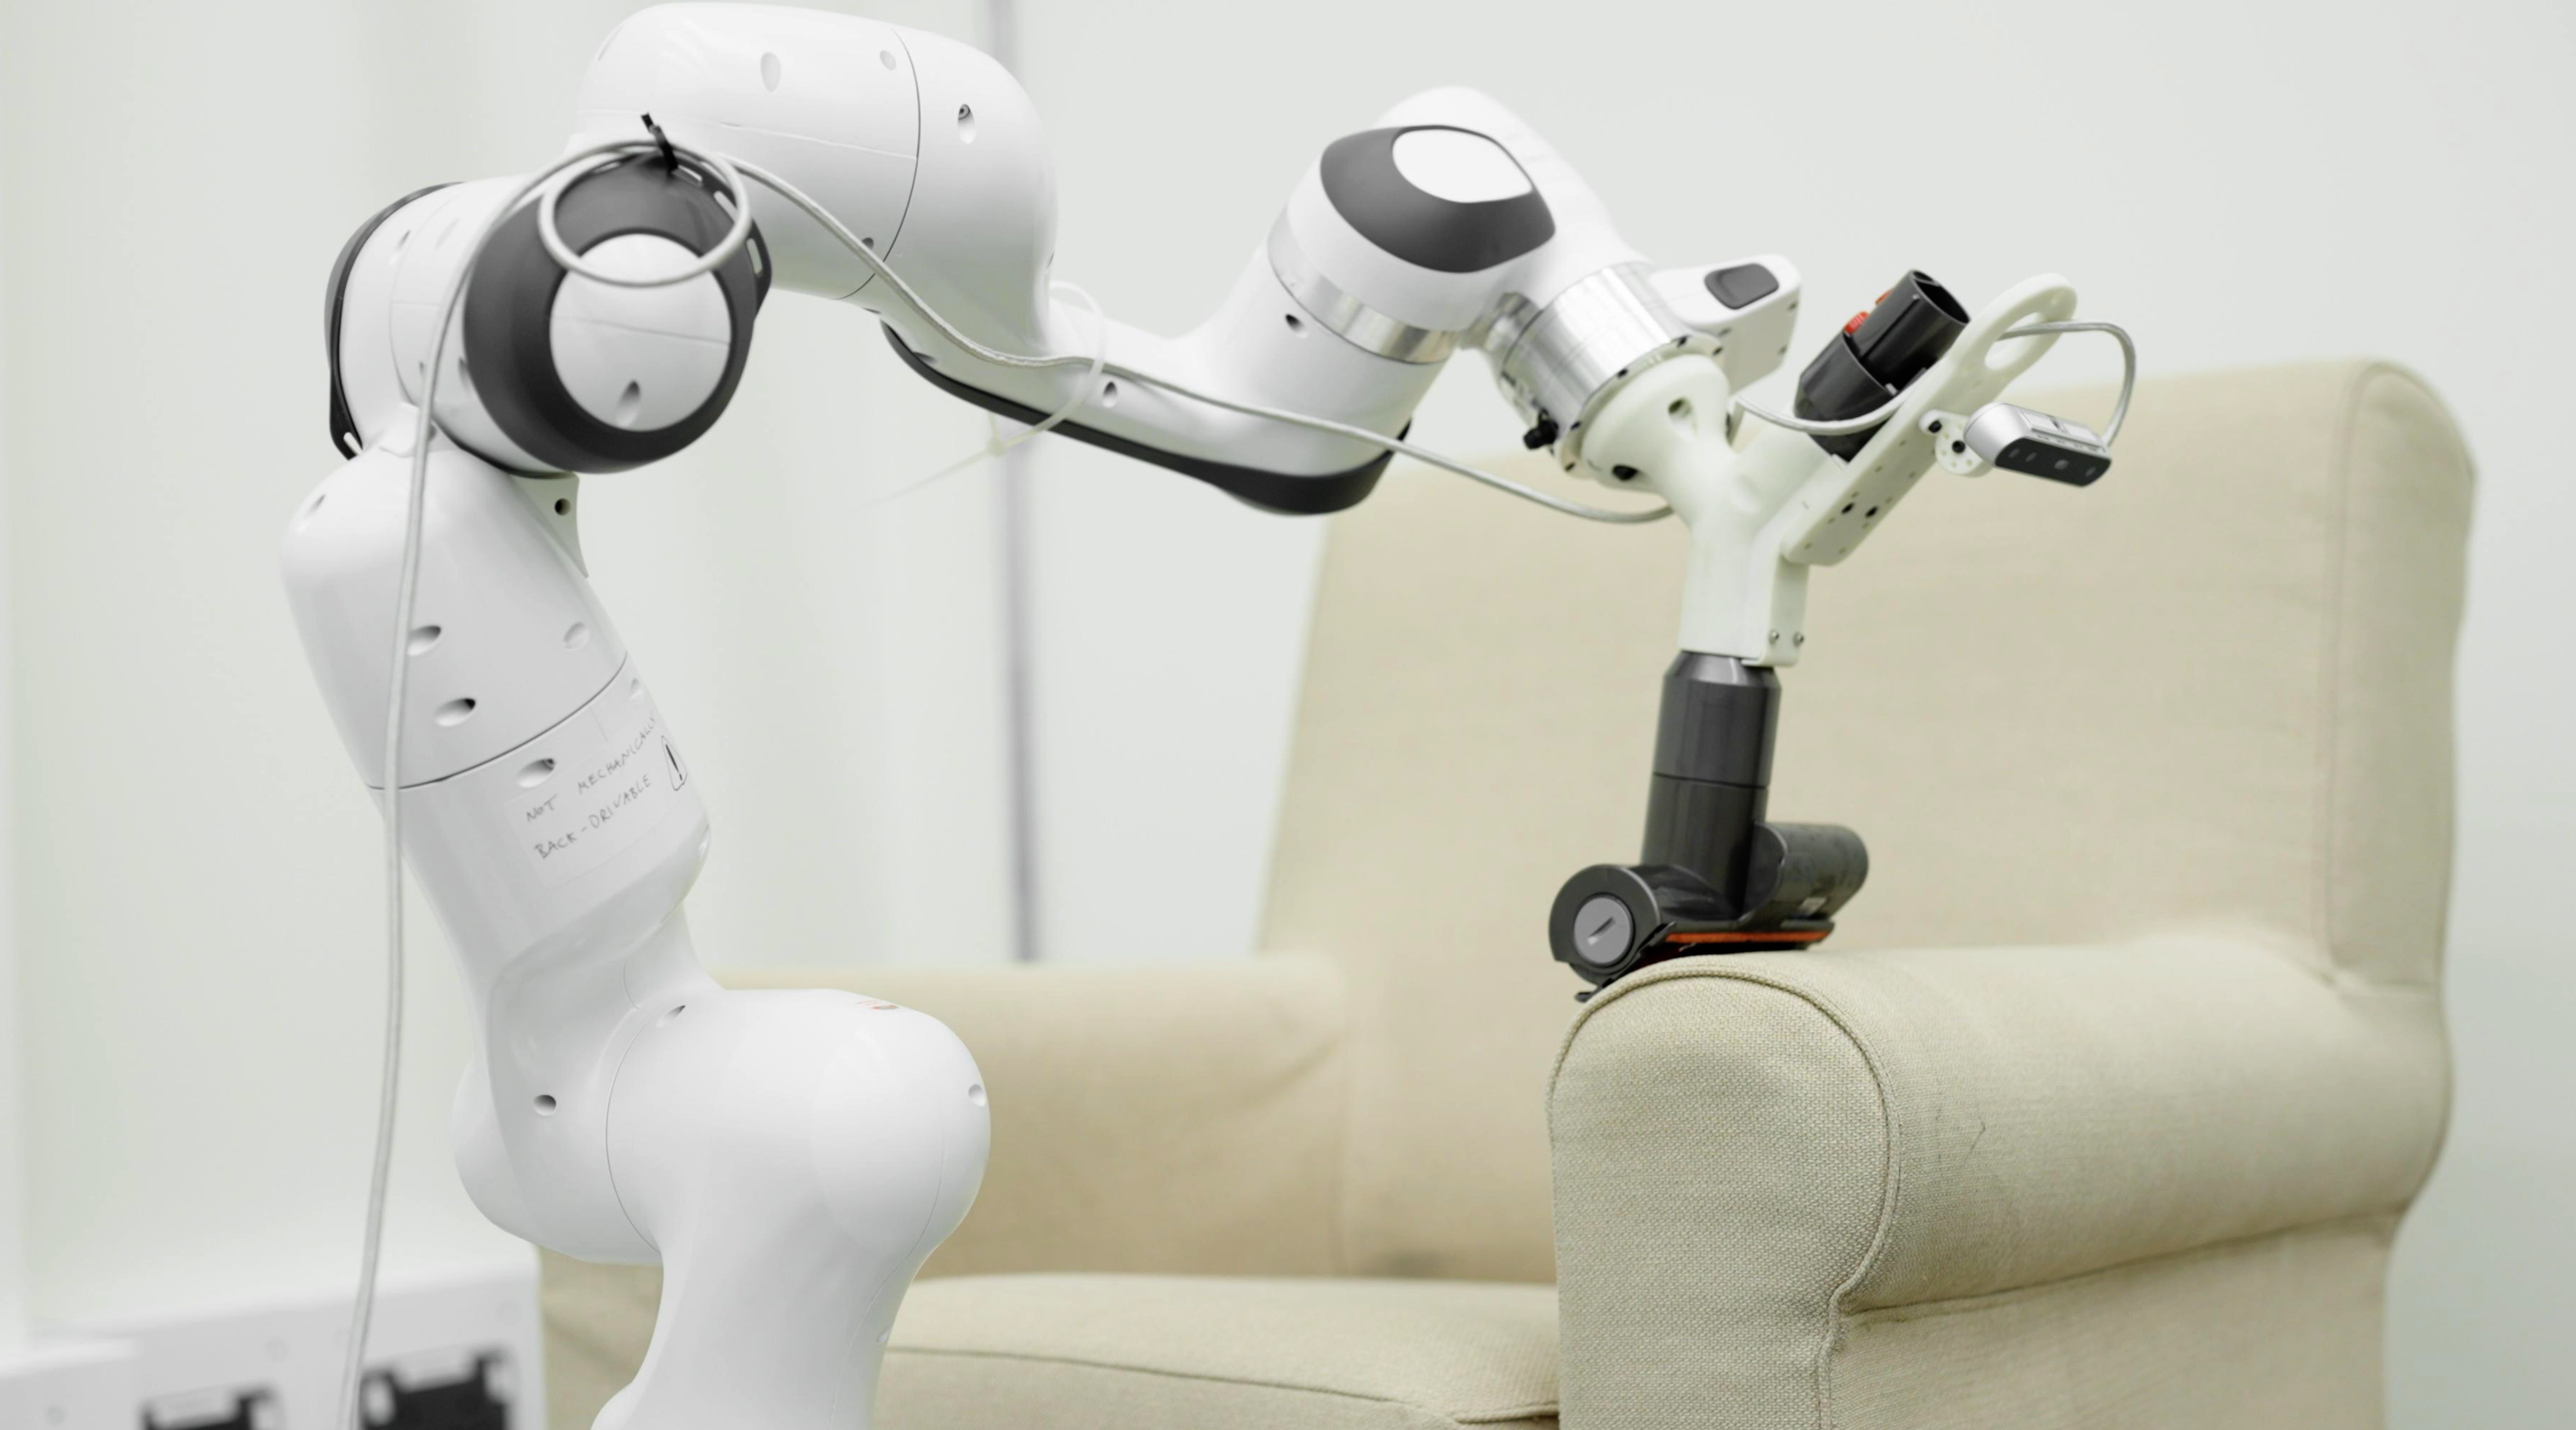 Incredible robot home helper that could spell the end of your days